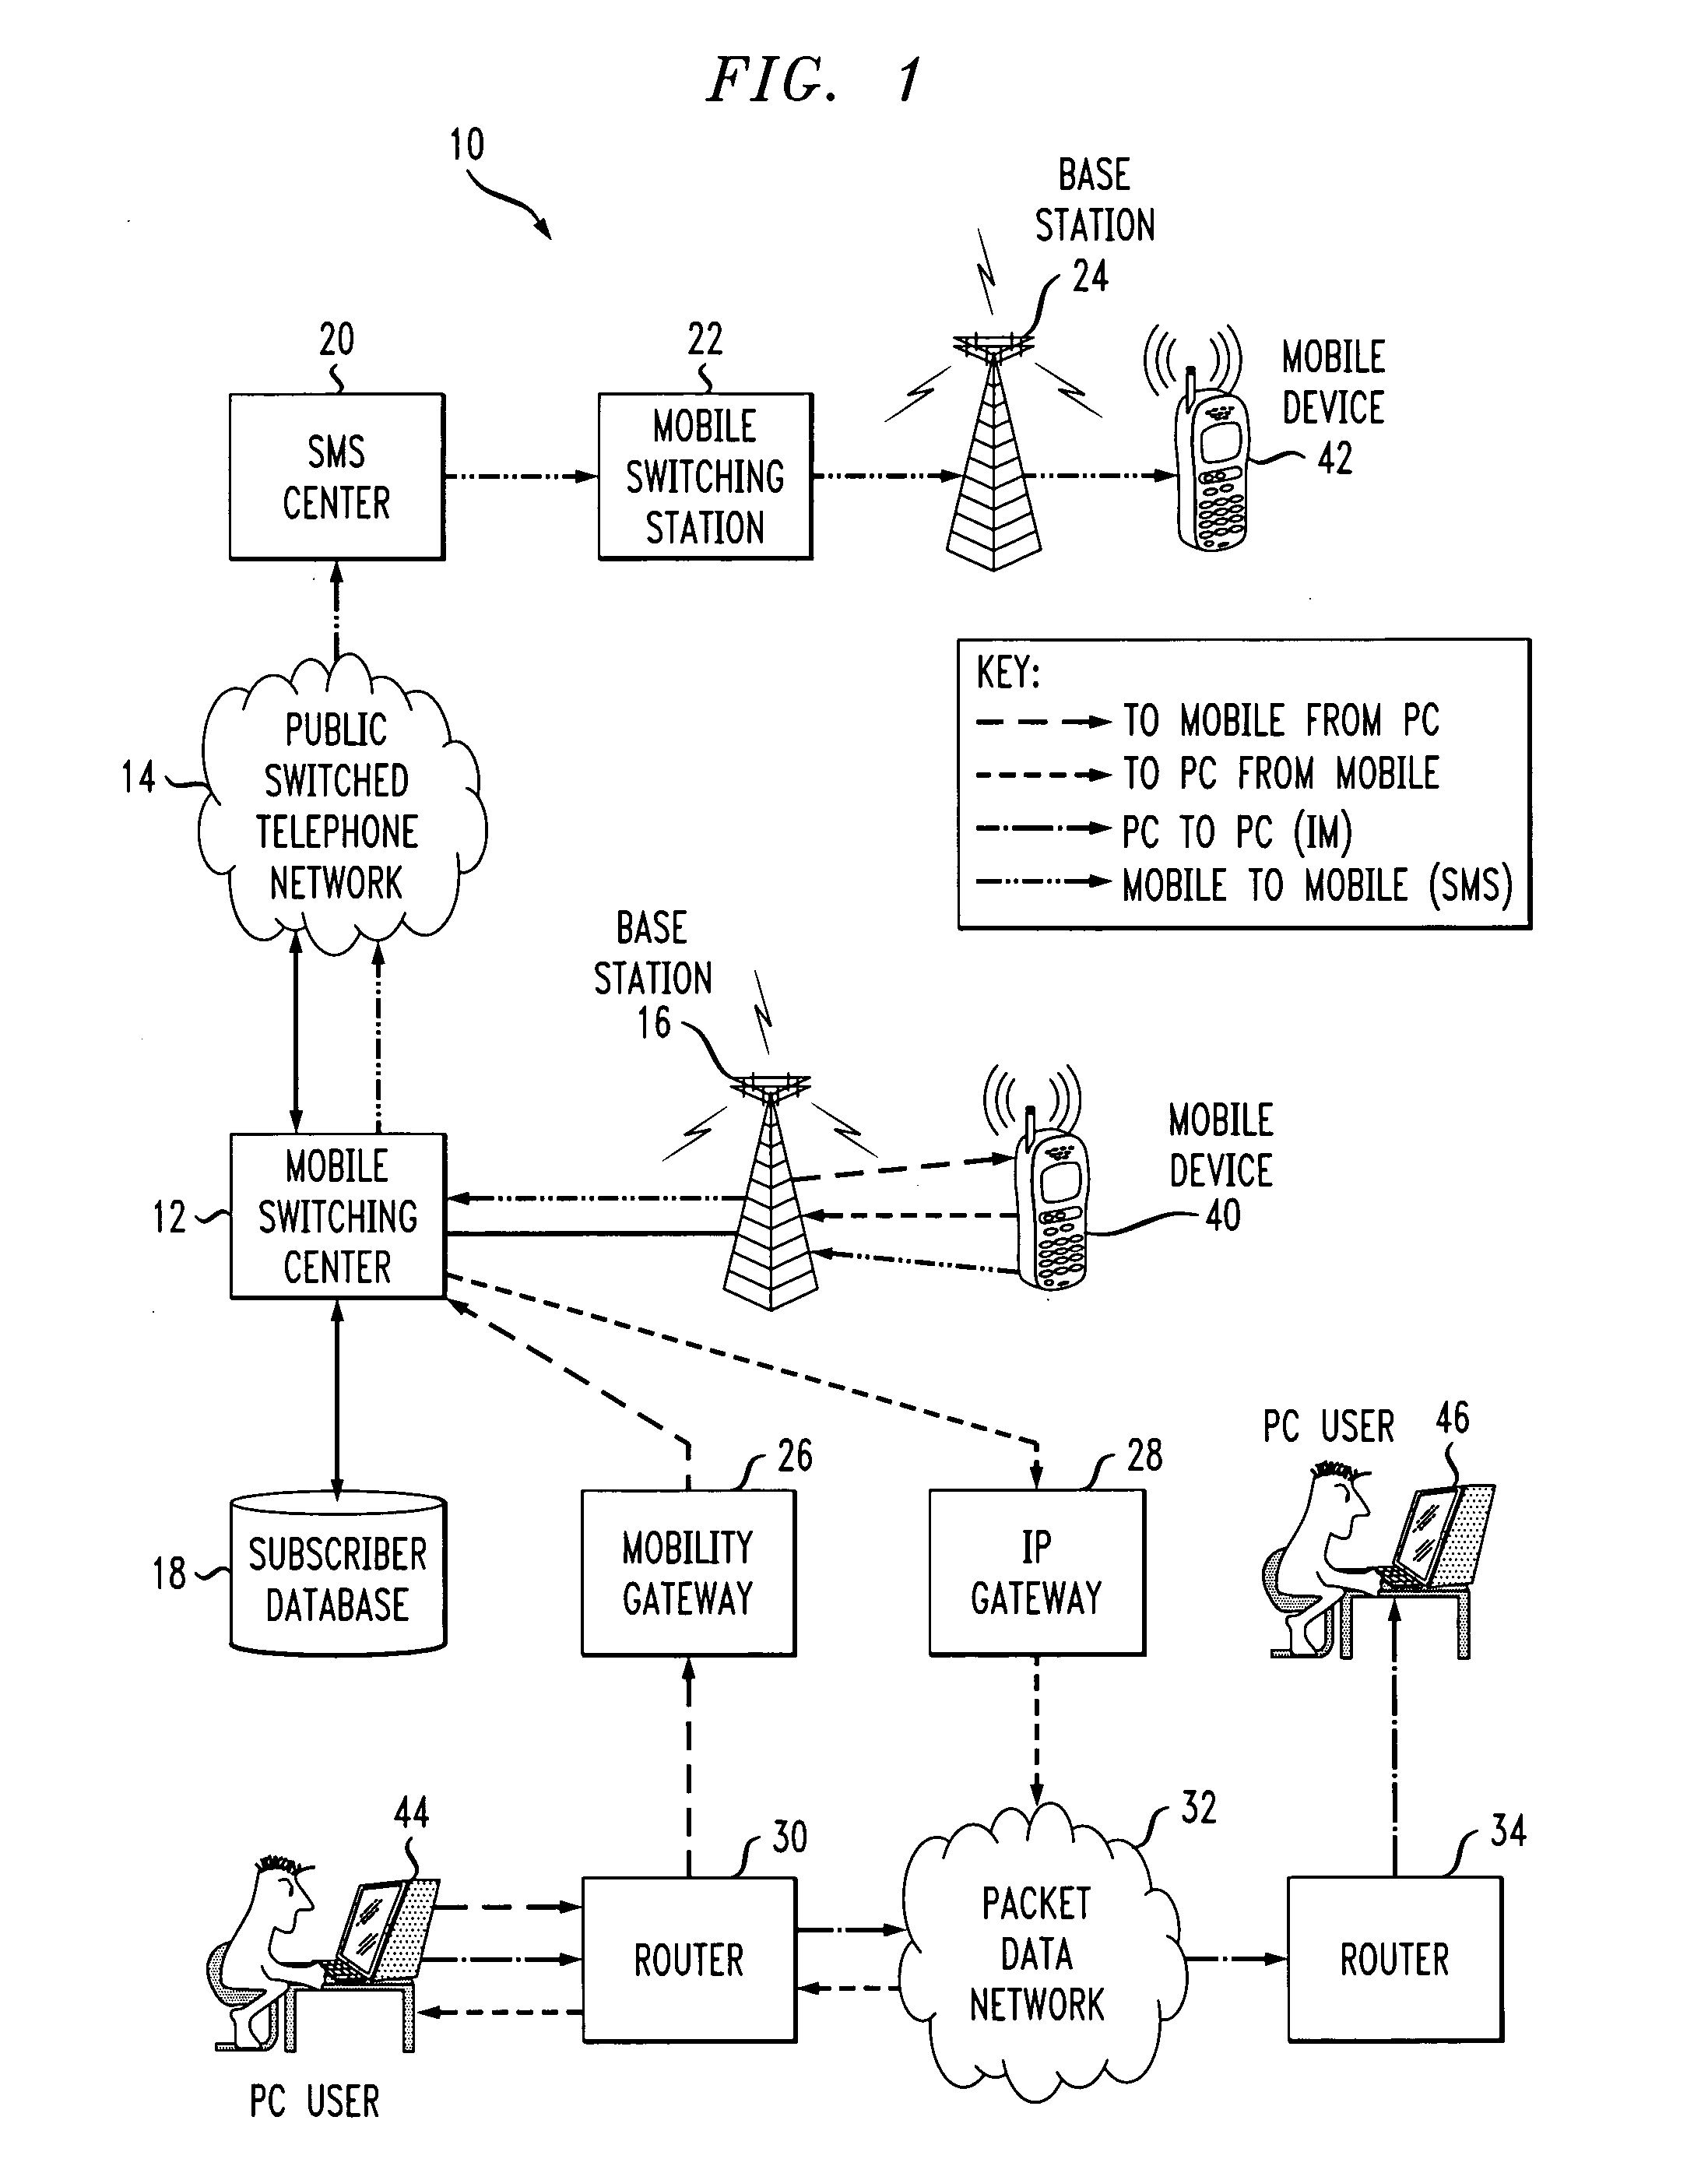 Method and system for providing network support for messaging between short message service (SMS) subscribers and instant messaging (IM) subscribers